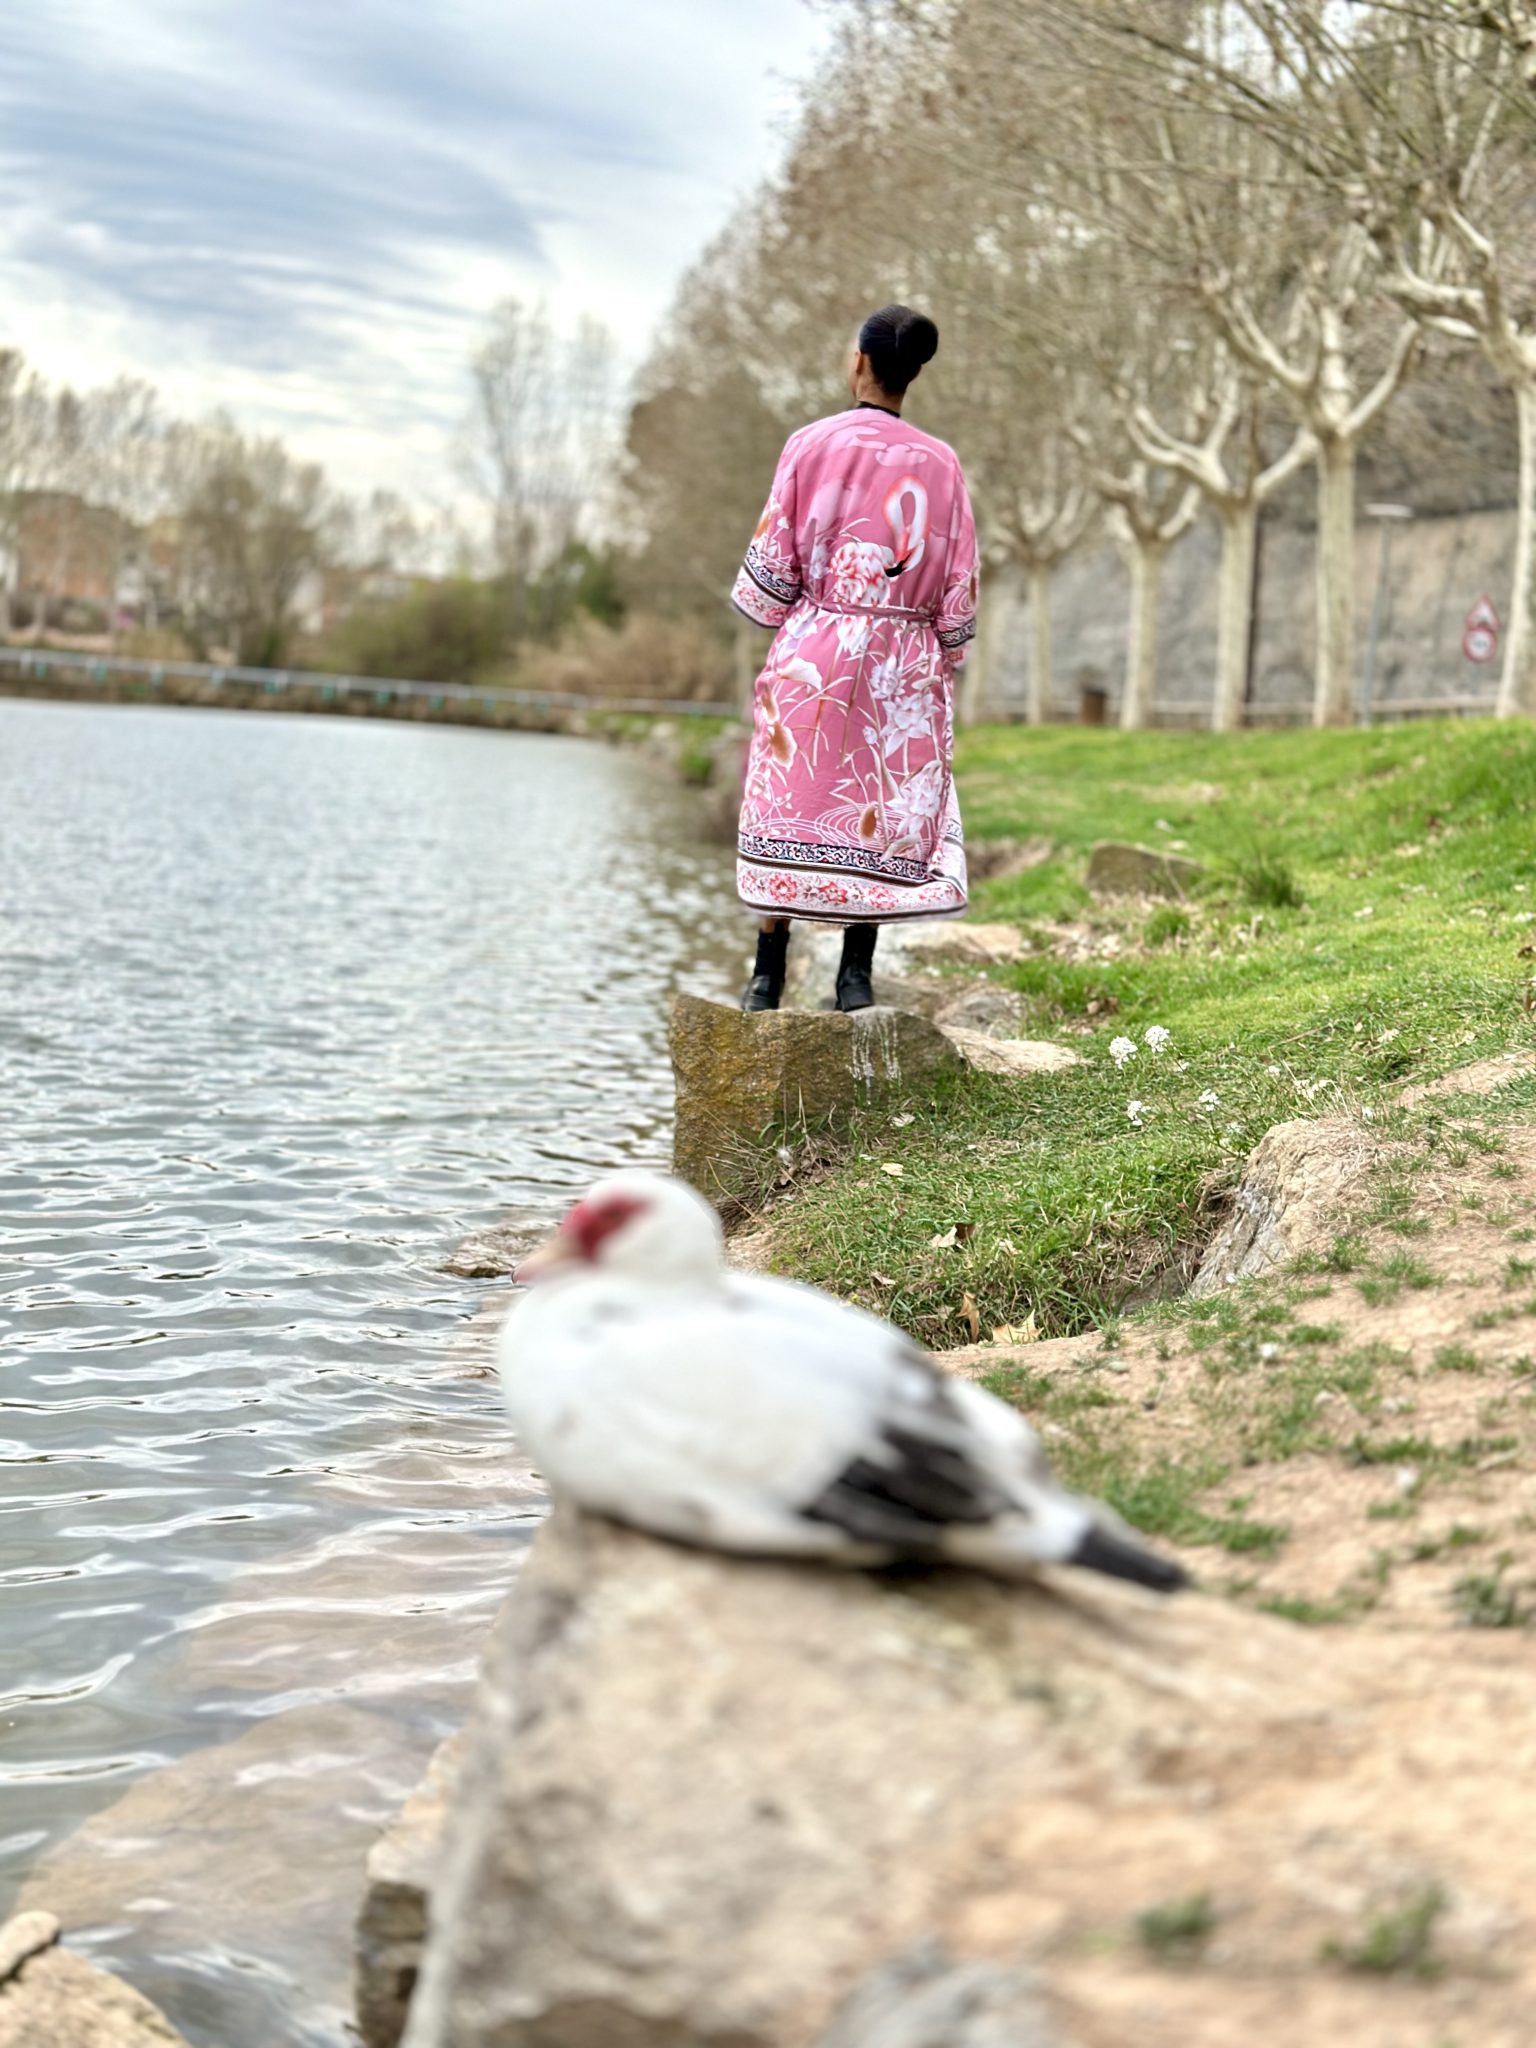 Kimono rosa con flamenco al lado del rio con pato. Person standing on a rock next to water wearing a pink kimono with a flamingo on it. In the immediate foreground, blurry, is a duck snuggled down to keep warm.